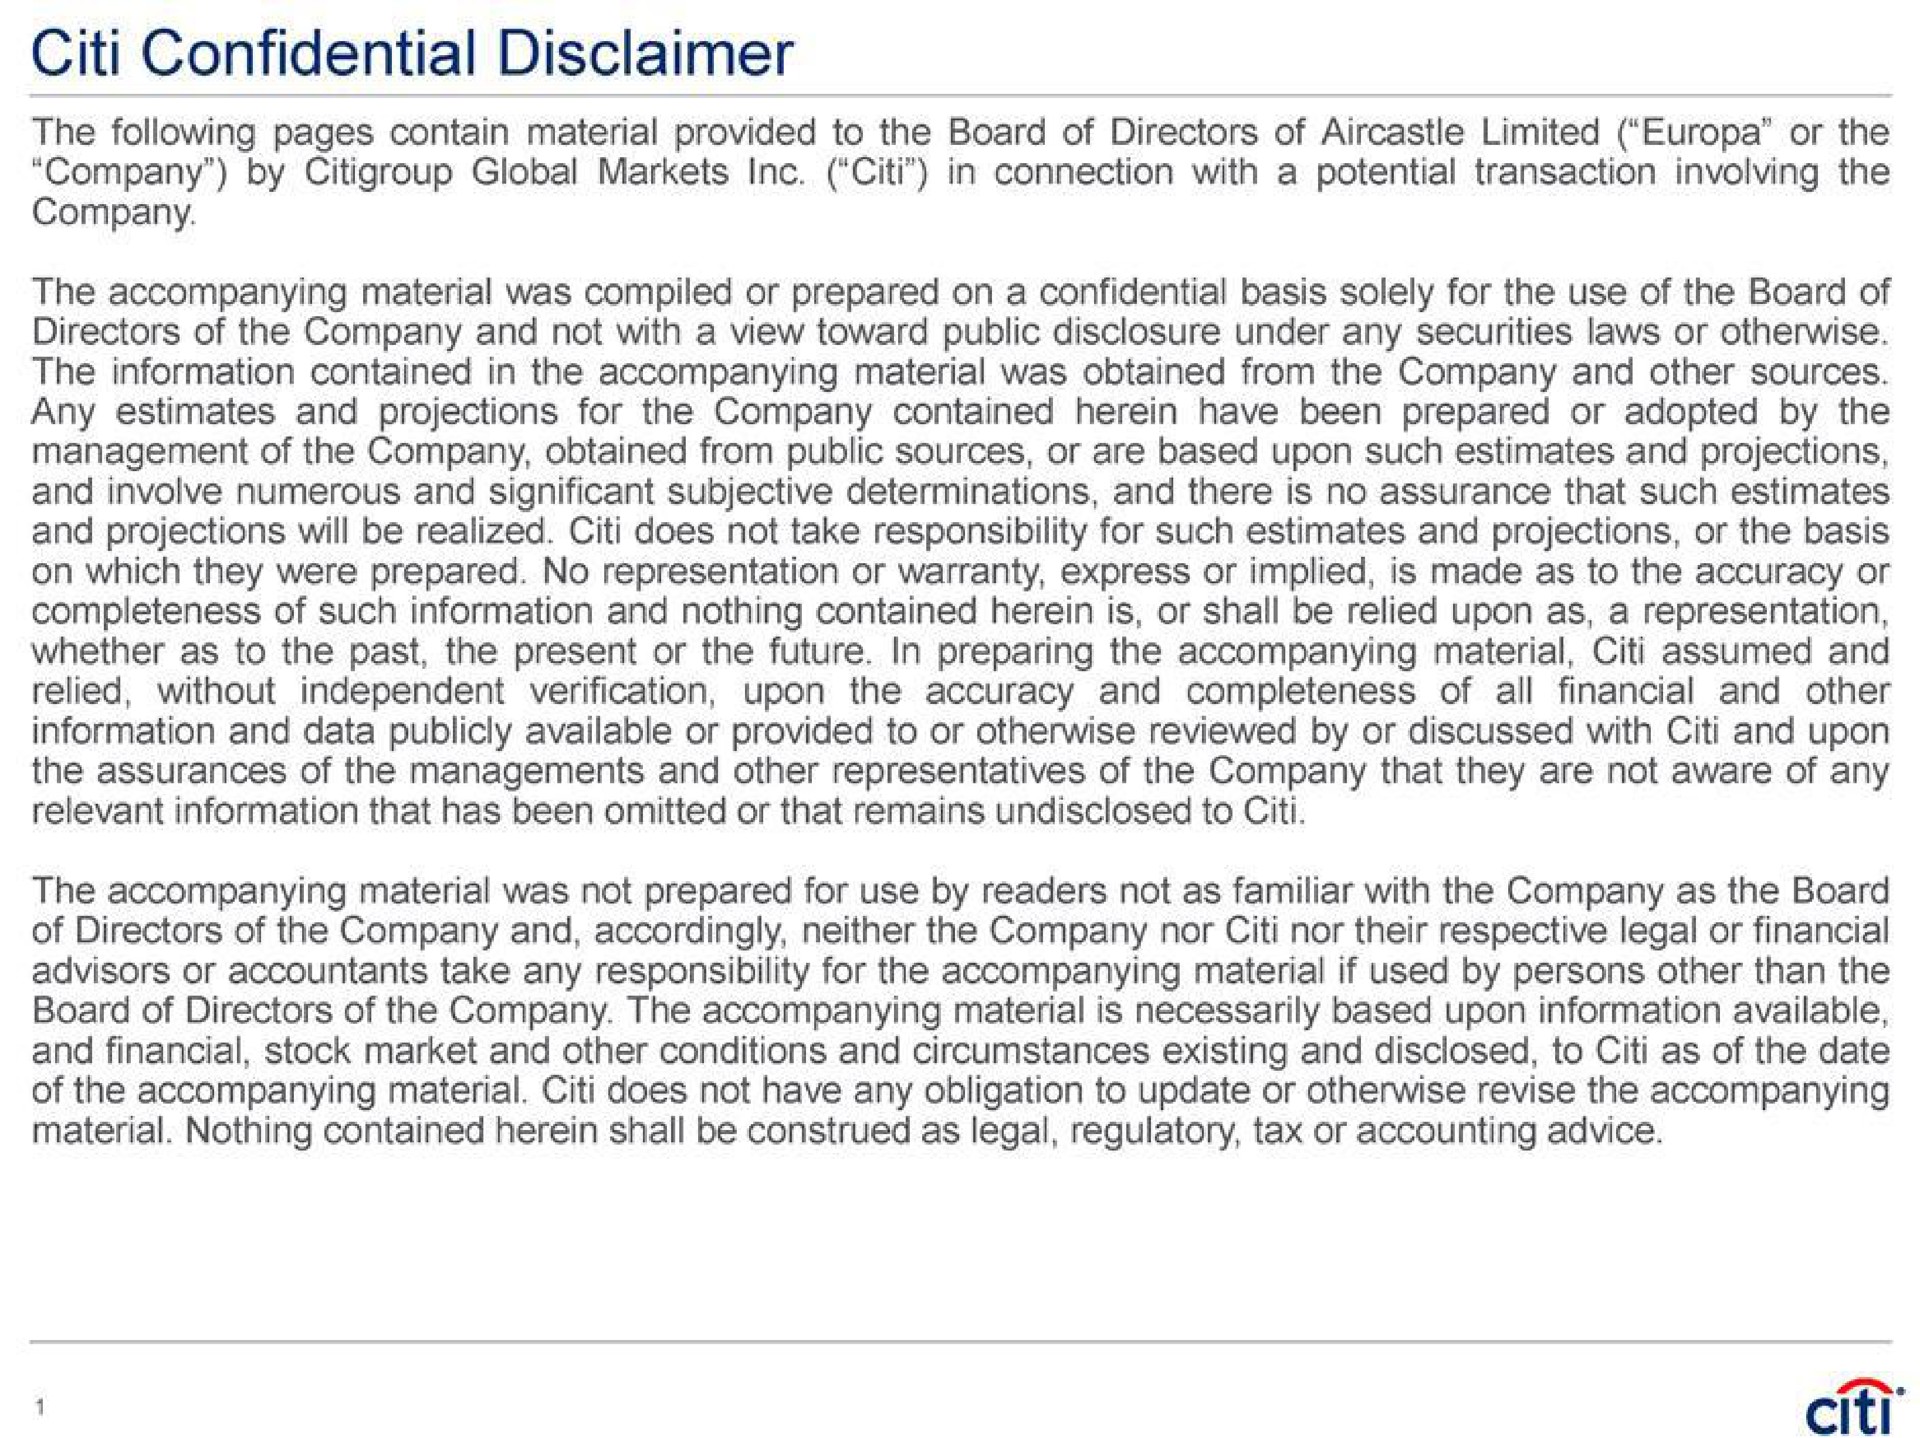 confidential disclaimer the following pages contain material provided to the board of directors of limited or the in connection with a potential transaction involving the company by global markets company the accompanying material was compiled or prepared on a confidential basis solely for the use of the board of directors of the company and not with a view toward public disclosure under any securities laws or otherwise the information contained in the accompanying material was obtained from the company and other sources any estimates and projections for the company contained herein have been prepared or adopted by the management of the company obtained from public sources or are based upon such estimates and projections and involve numerous and significant subjective determinations and there is no assurance that such estimates and projections will be realized does not take responsibility for such estimates and projections or the basis on which they were prepared no representation or warranty express or implied is made as to the accuracy or completeness of such information and nothing contained herein is or shall be relied upon as a representation whether as to the past the present or the future in preparing the accompanying material assumed and relied without independent verification upon the accuracy and completeness of financial and other information and data publicly available or provided to or otherwise reviewed by or discussed with and upon the assurances of the managements and other representatives of the company that they are not aware of any relevant information that has been omitted or that remains undisclosed to all the accompanying material was not prepared for use by readers not as familiar with the company as the board of directors of the company and accordingly neither the company nor nor their respective legal or financial advisors or accountants take any responsibility for the accompanying material if used by persons other than the board of directors of the company the accompanying material is necessarily based upon information available and financial stock market and other conditions and circumstances existing and disclosed to as of the date of the accompanying material does not have any obligation to update or otherwise revise the accompanying material nothing contained herein shall be construed as legal regulatory tax or accounting advice | Citi